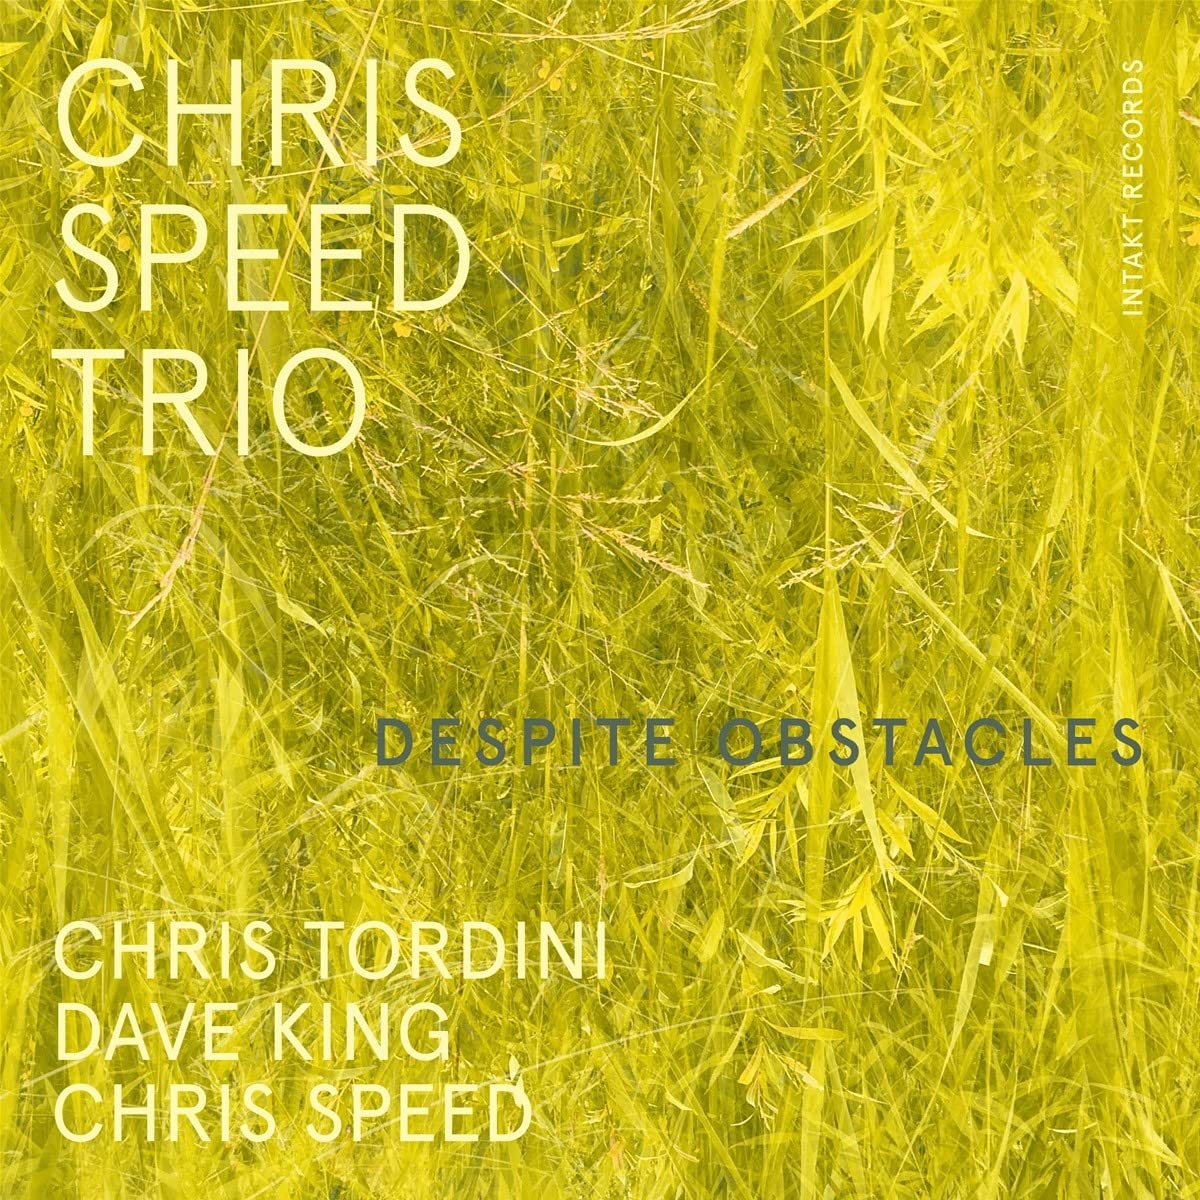 CHRIS SPEED - Chris Speed Trio : Despite Obstacles cover 